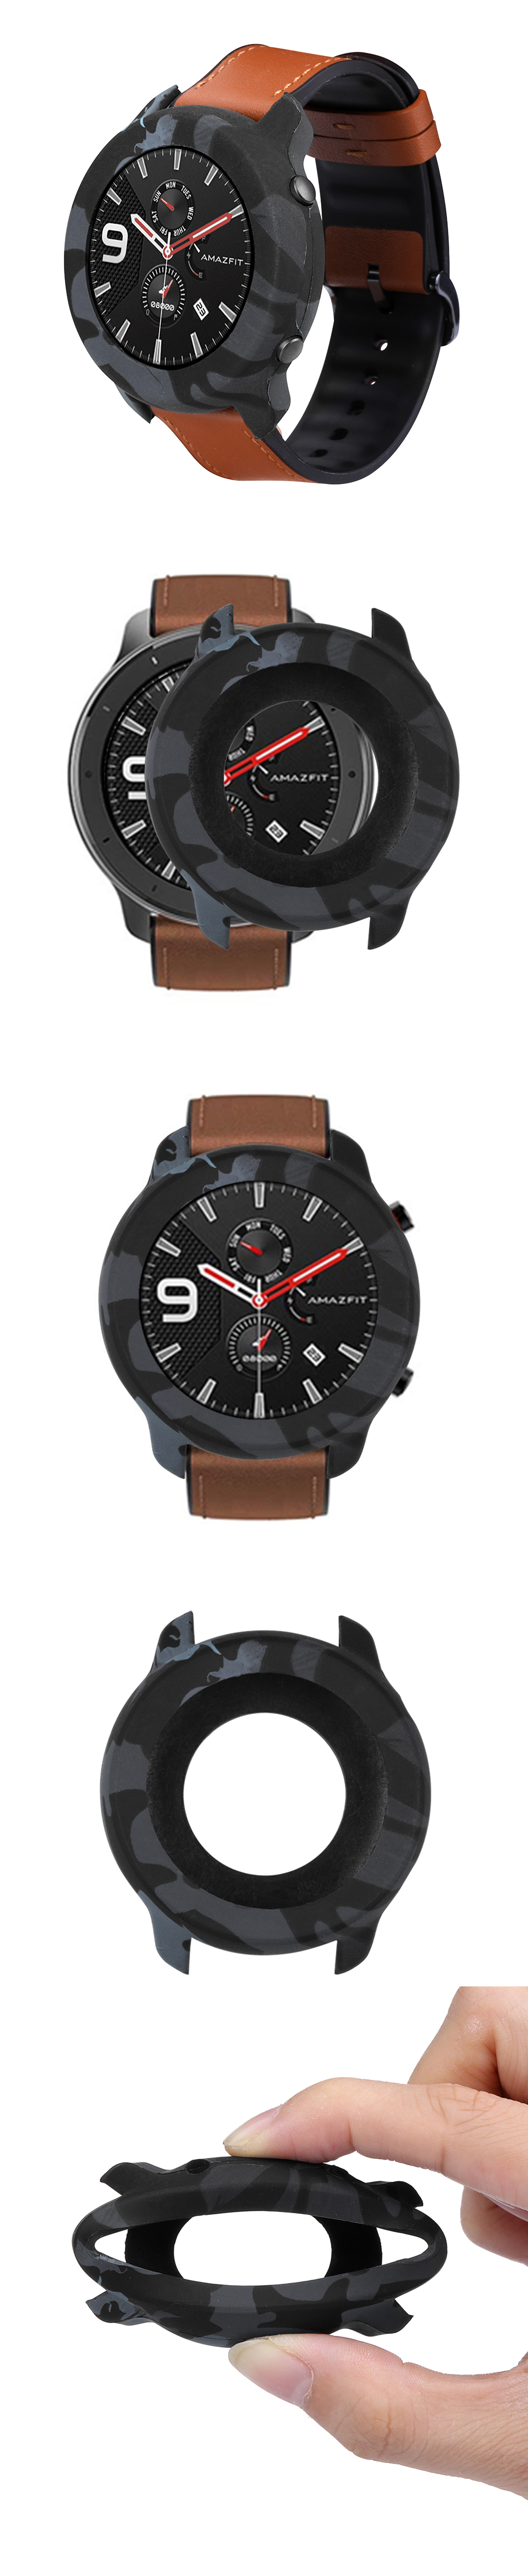 Bakeey-Camouflage-Soft-Silicone-Watch-Case-Cover-Watch-Cover-Screen-Protector-for-AMAZFIT-GTR-47mm-1614263-3